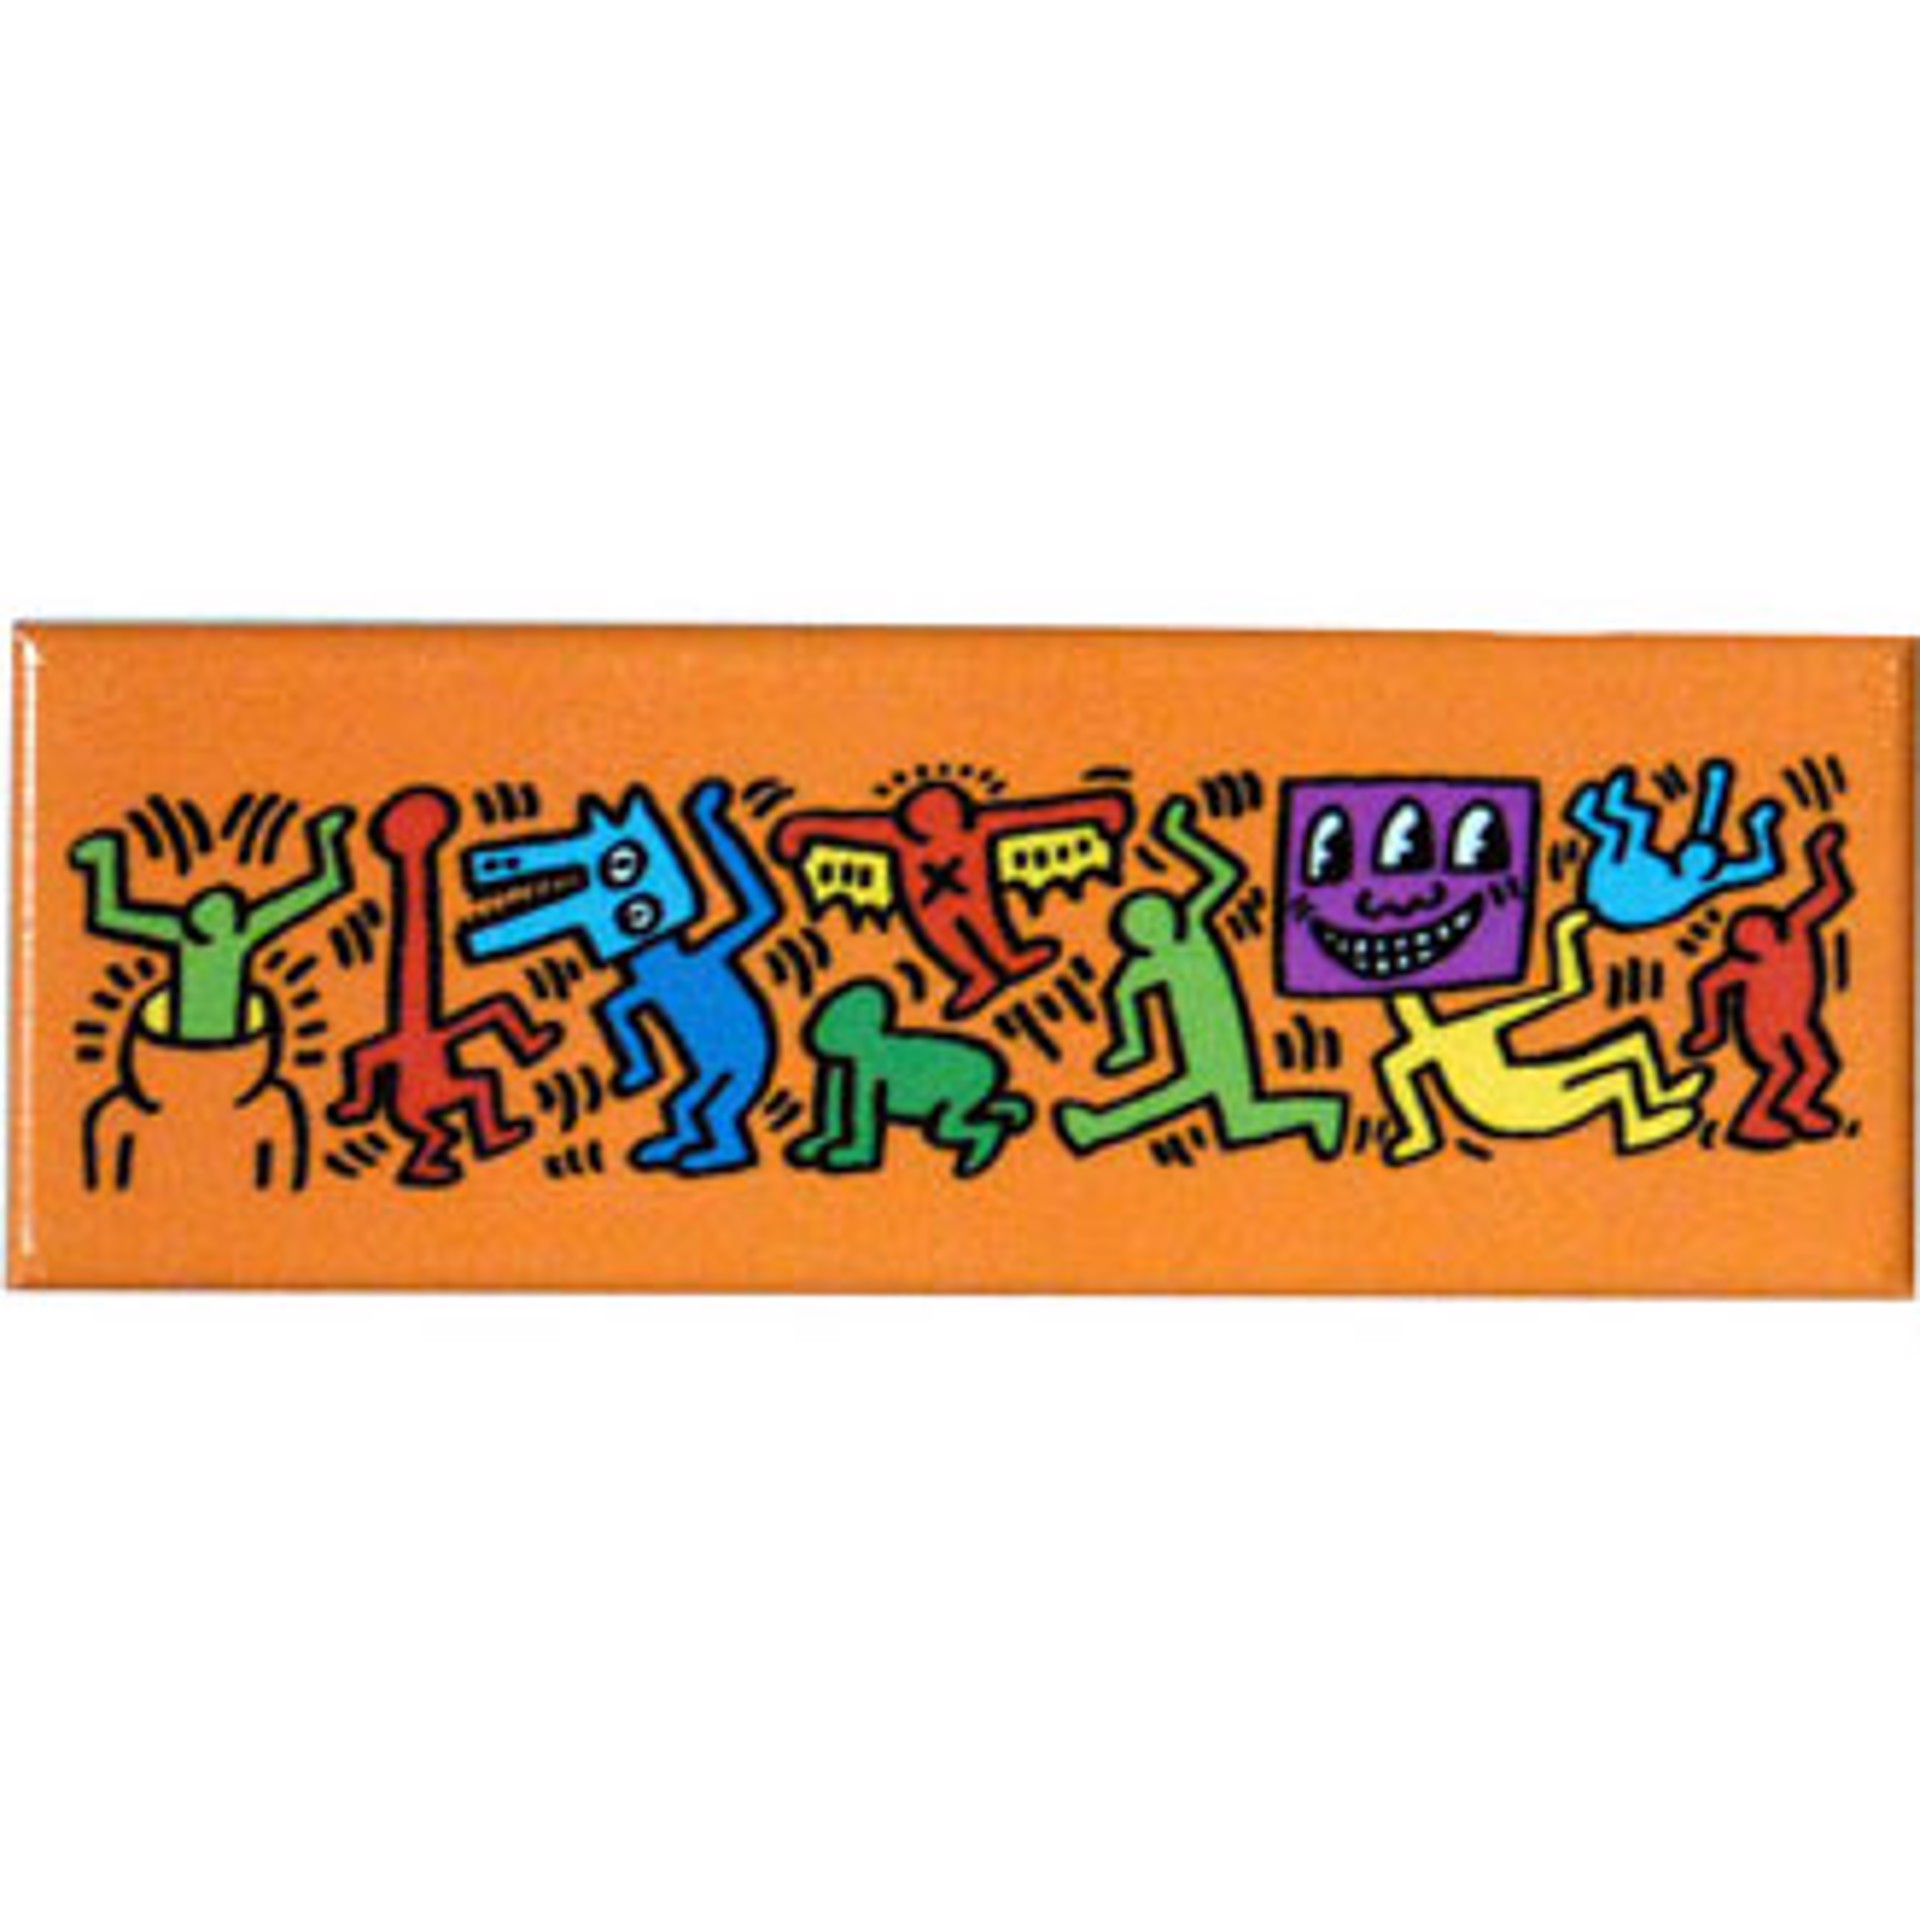 Figures on Orange 4.5x1.5 Magnet by Keith Haring